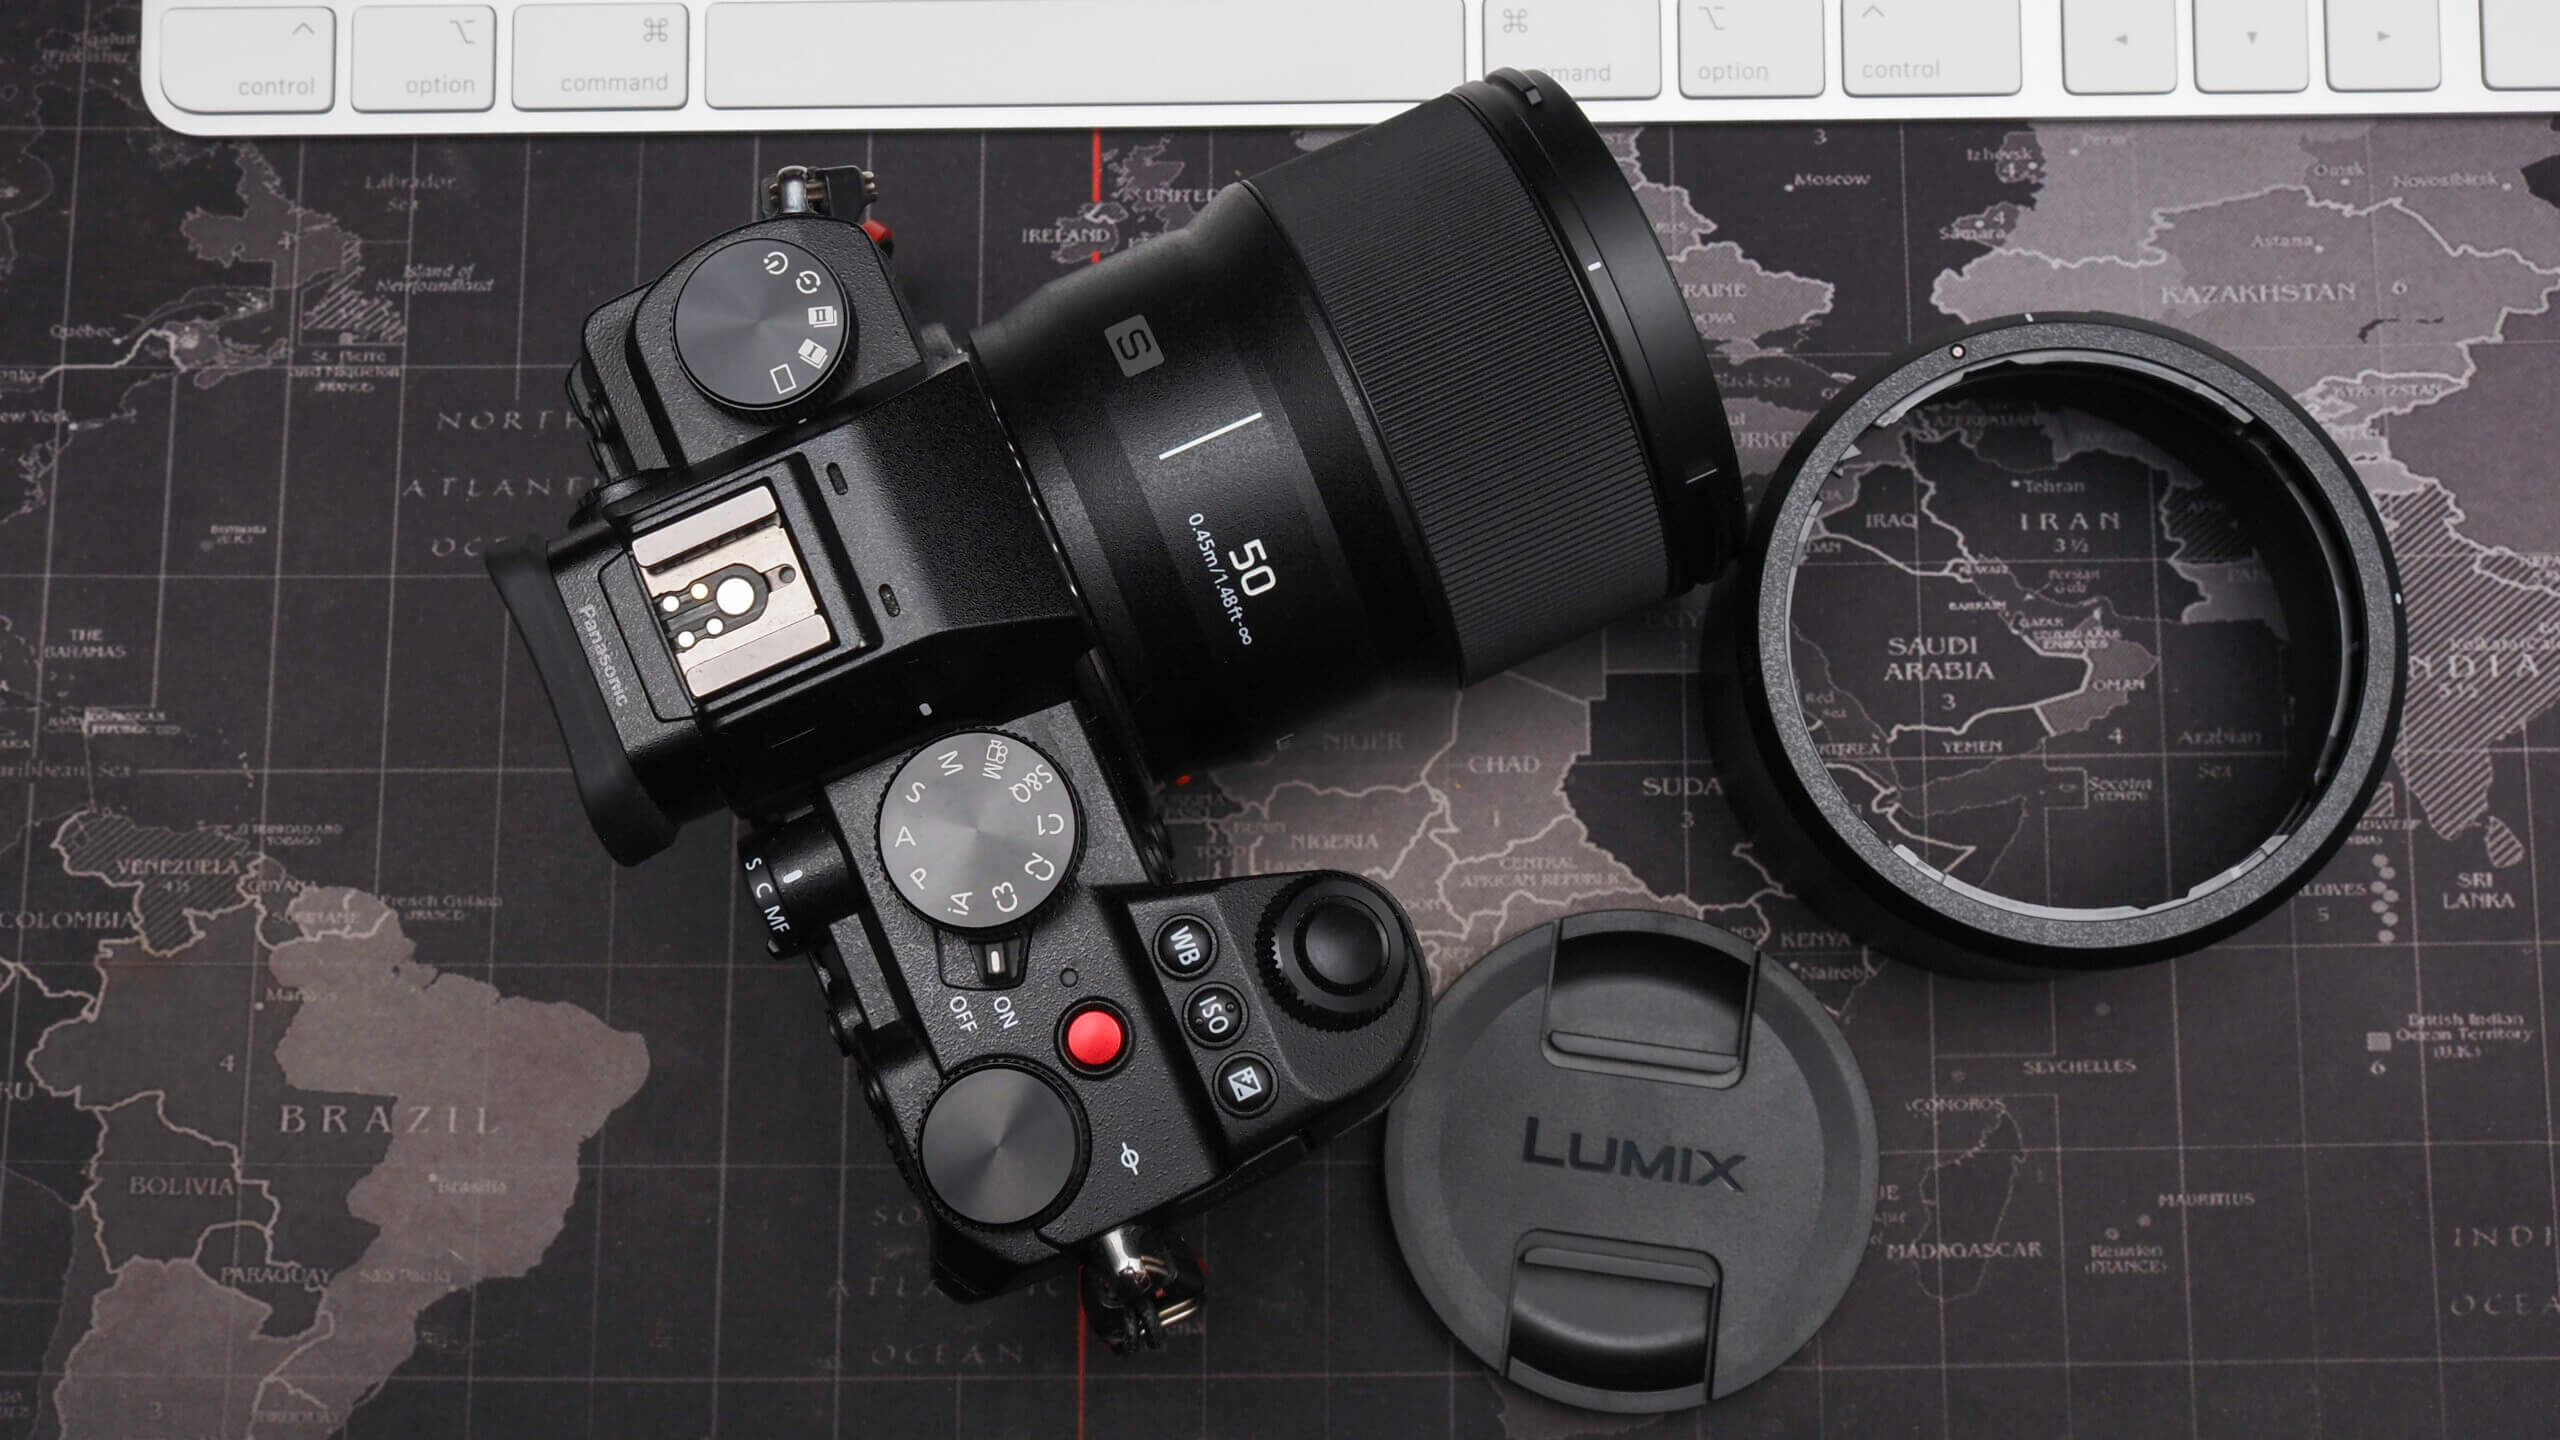 Panasonic Lumix 50mm f/1.8 S review: It's nifty, fifty, and oh so fine